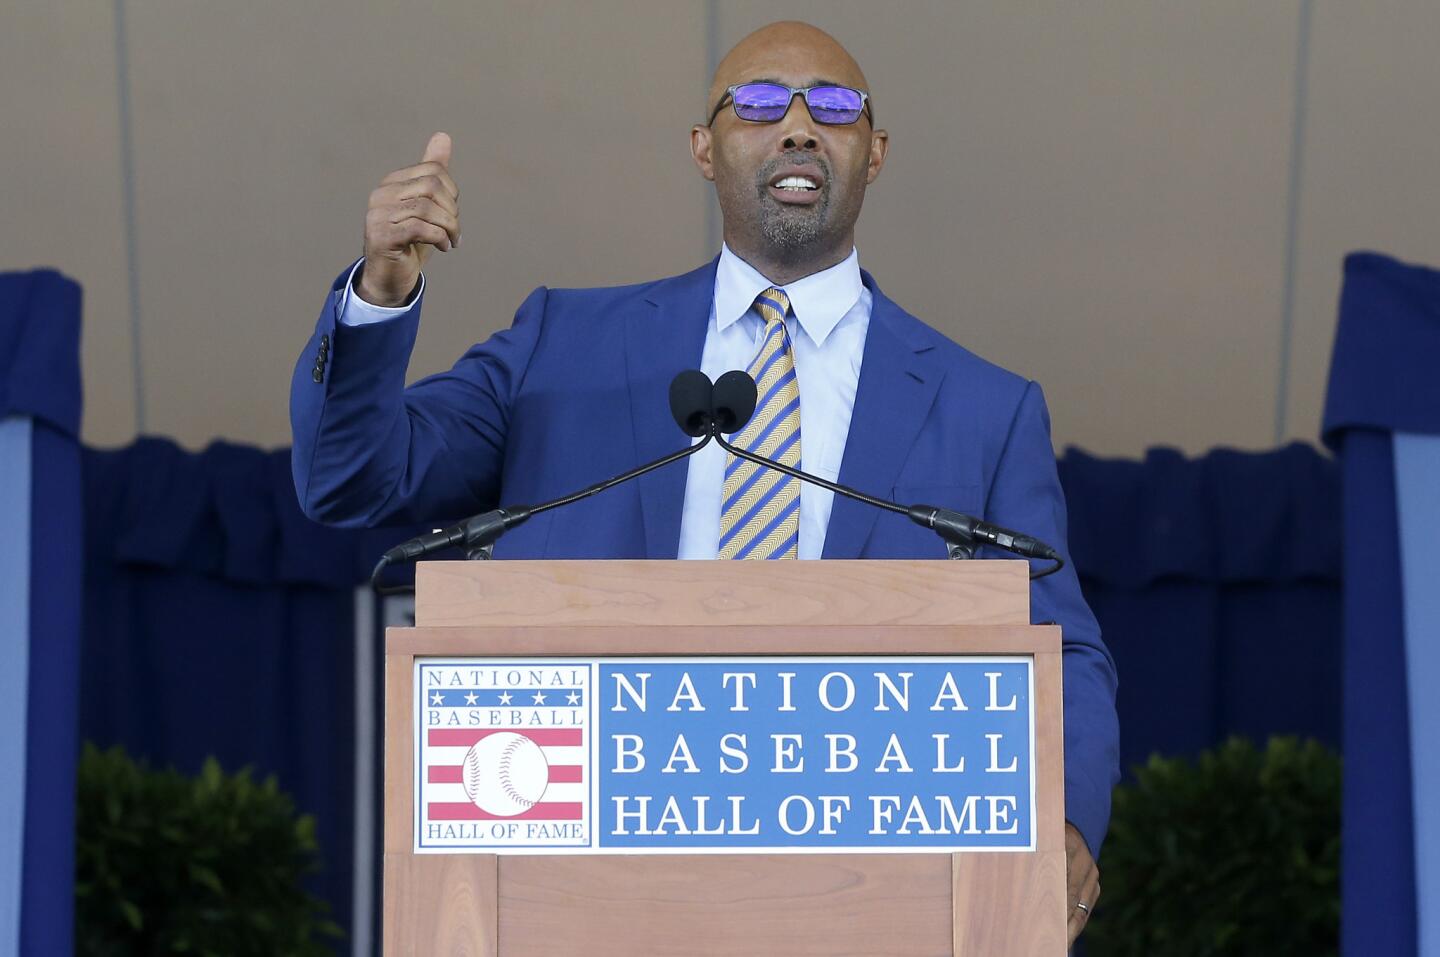 Harold Baines gives his speech during theHall of Fame induction ceremony at Clark Sports Center on July 21, 2019 in Cooperstown, New York.